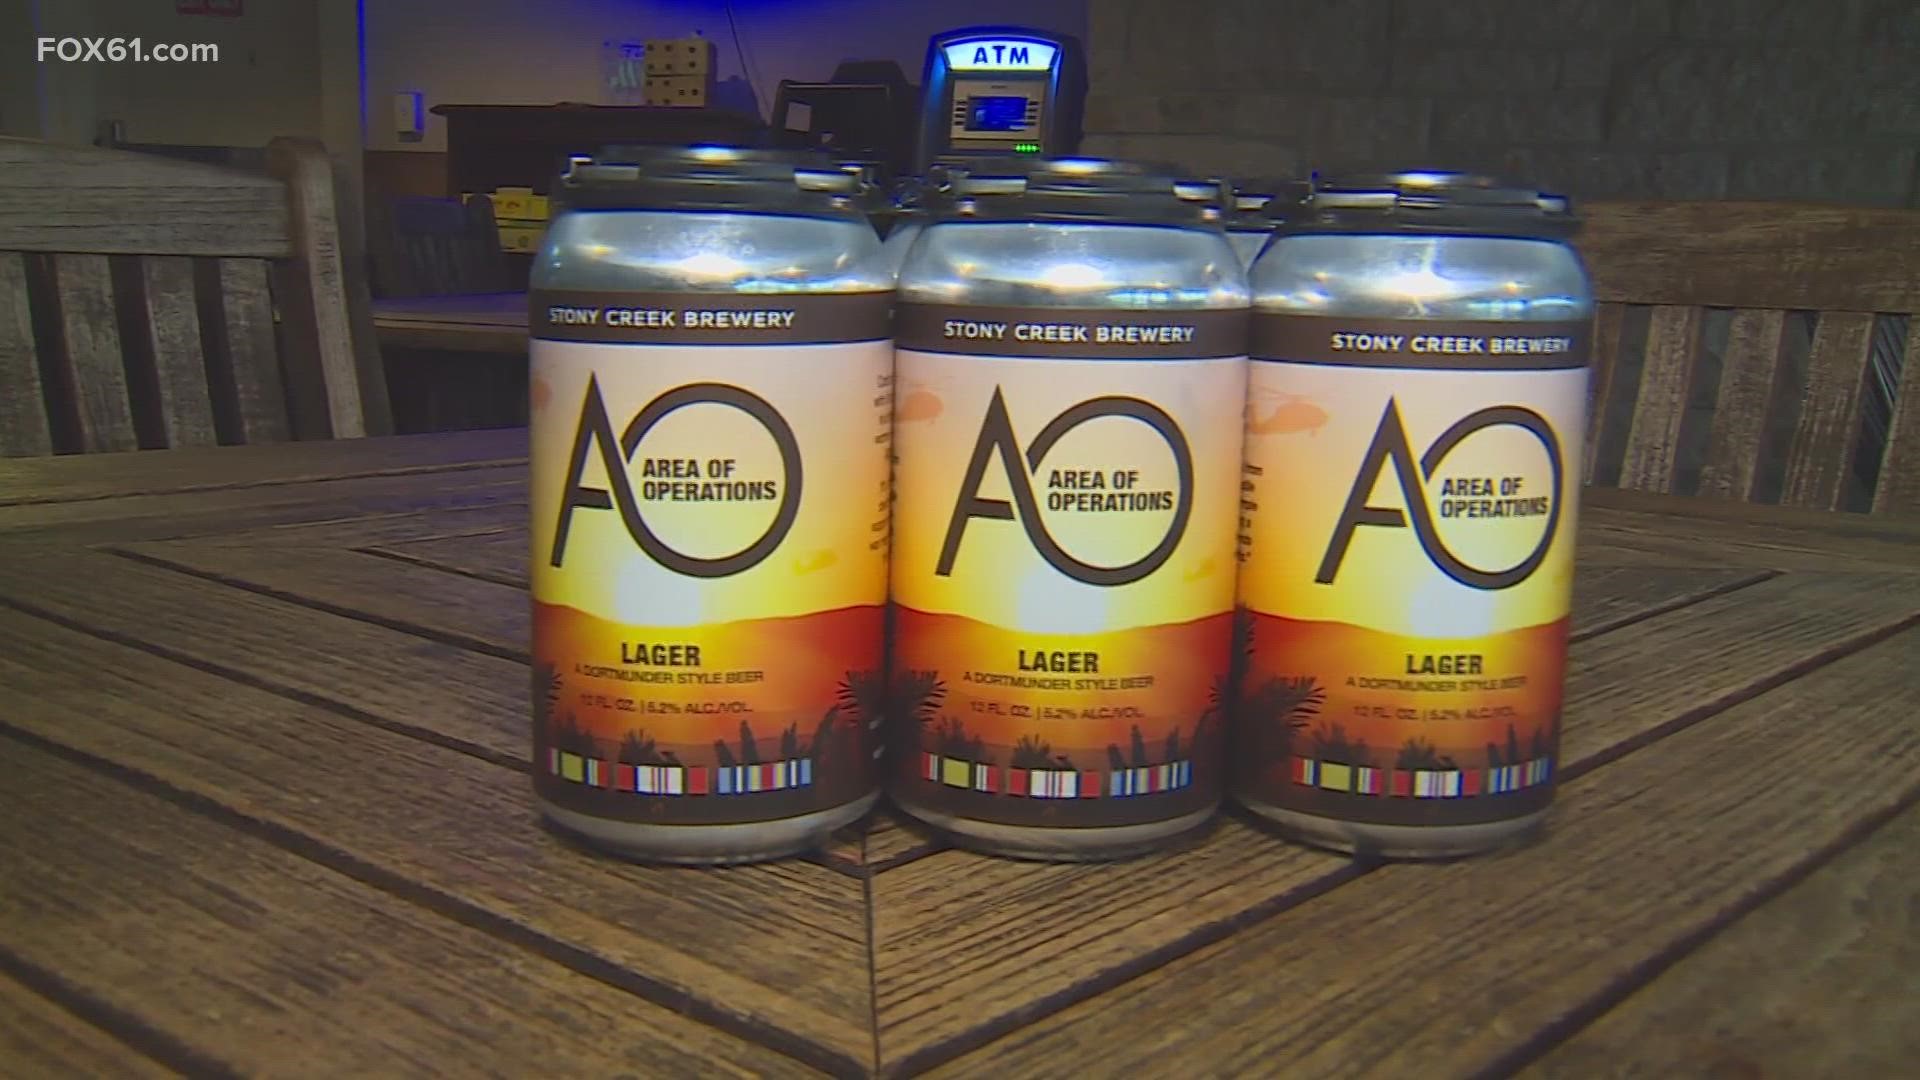 The new brew is part of an initiative to raise money for the first-ever monument in Connecticut honoring veterans of the Afghanistan and Iraq Wars.